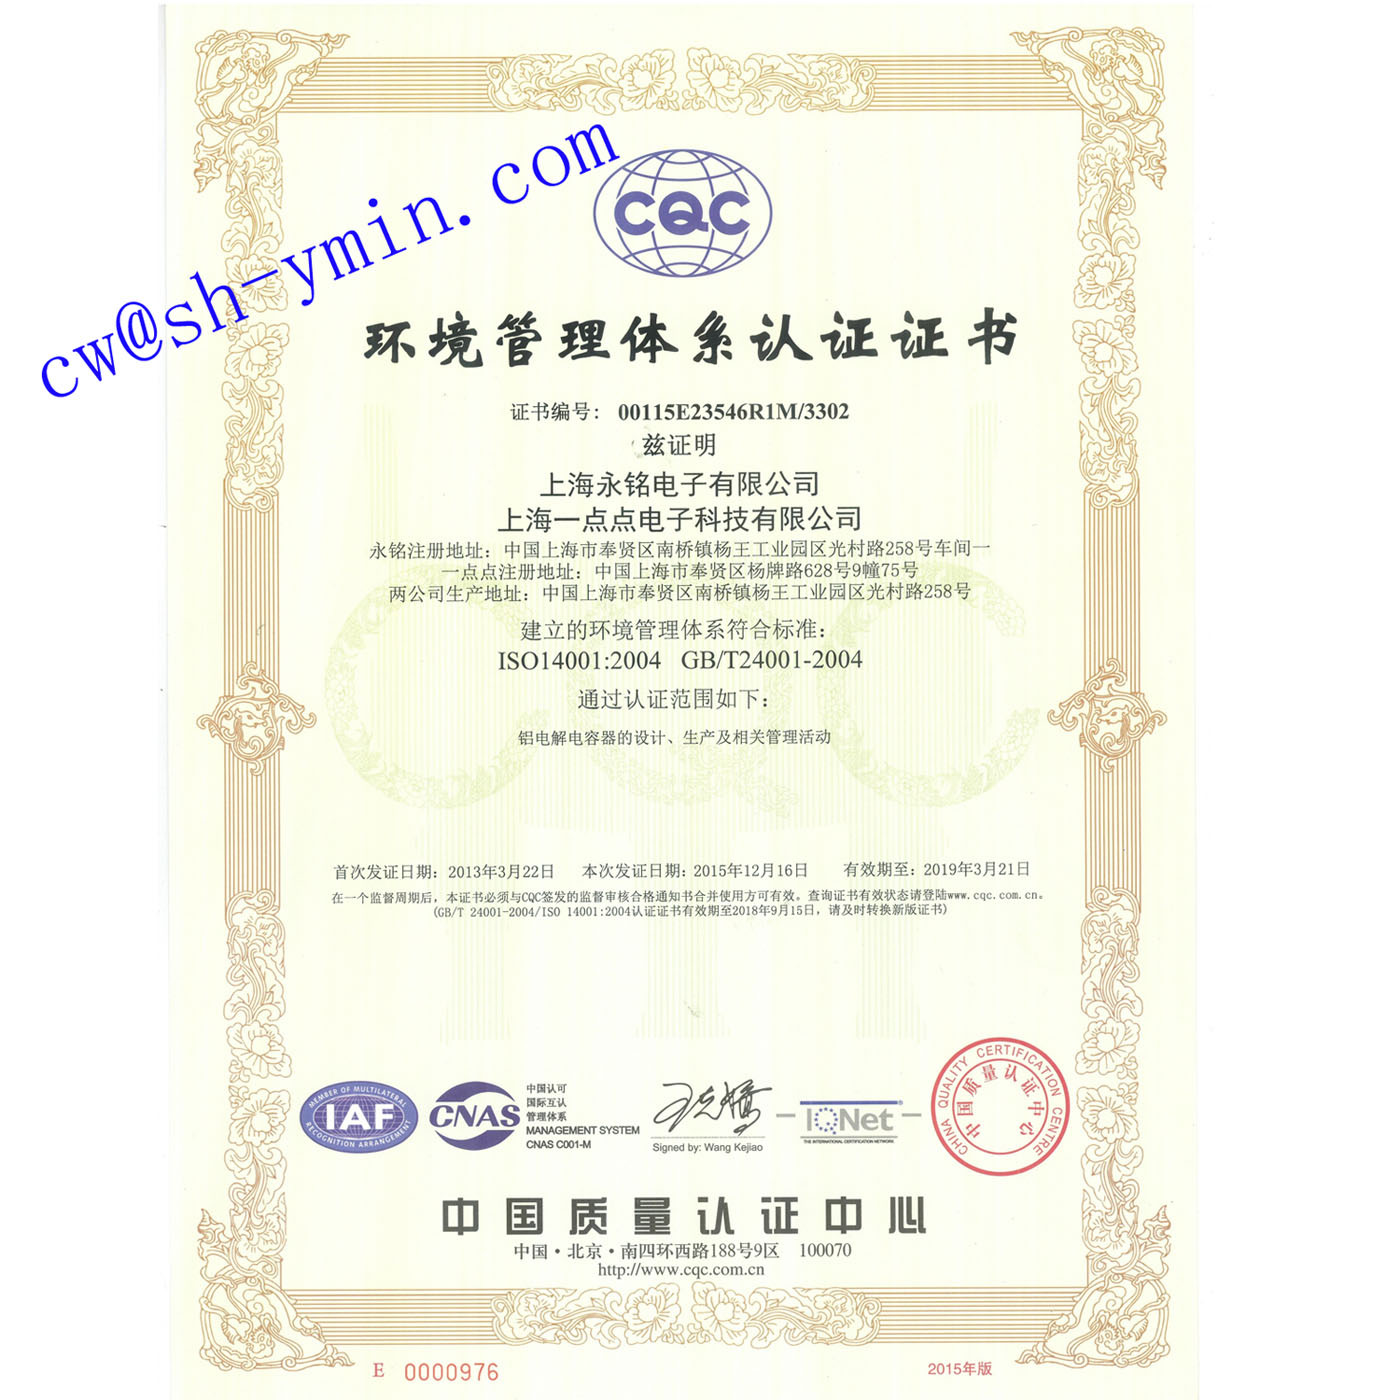 Shanghai Yongming Electrolytic Capacitor Manufacturing Co. Ltd Certifications